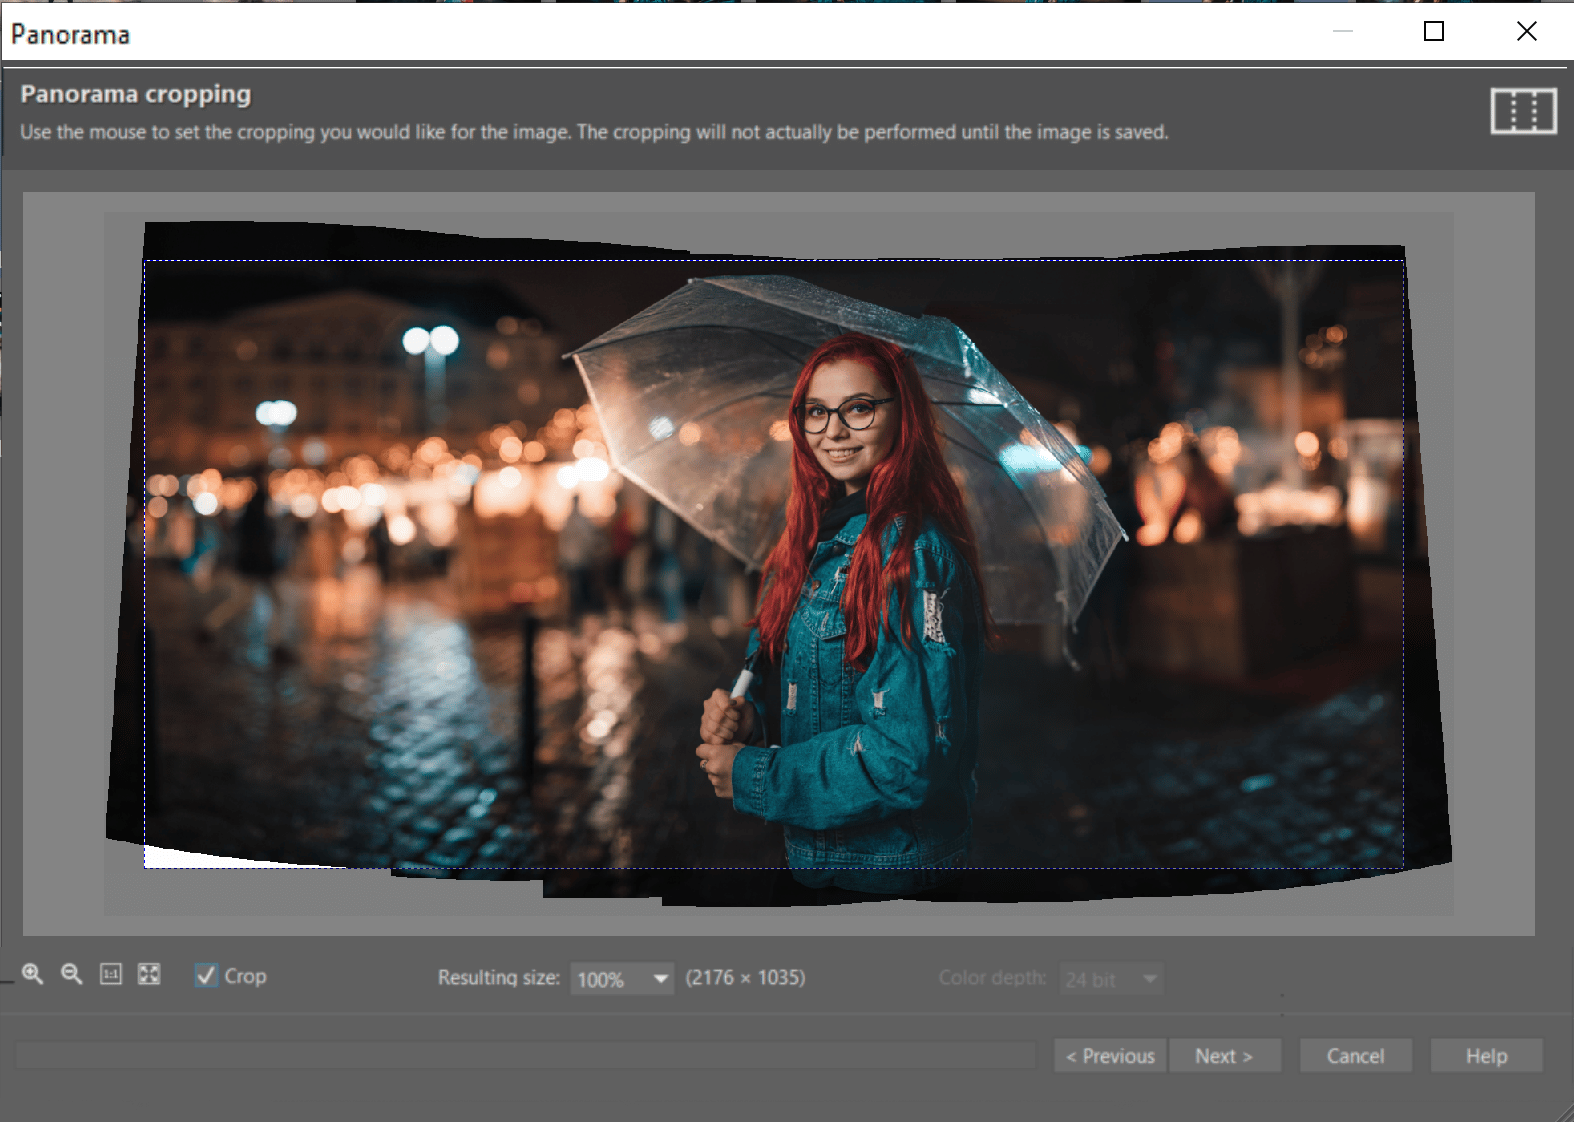 Improve Your Photos, Improve Hairstyles! 5 Tips for Getting the Most out of Liquify